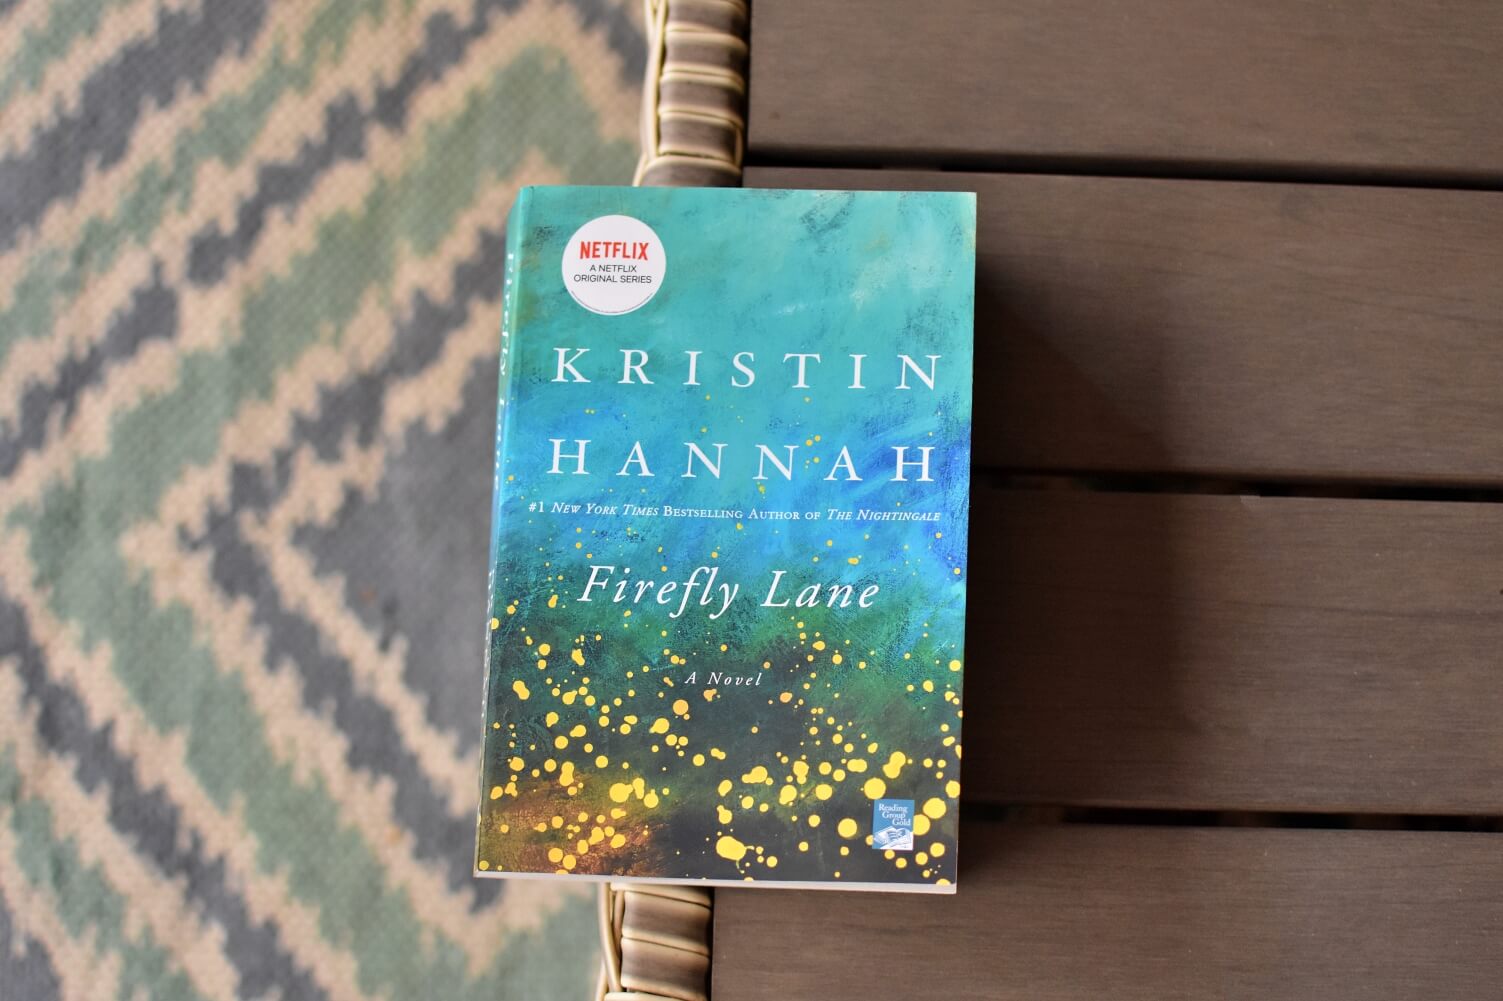 Book Club Questions for Firefly Lane by Kristin Hannah